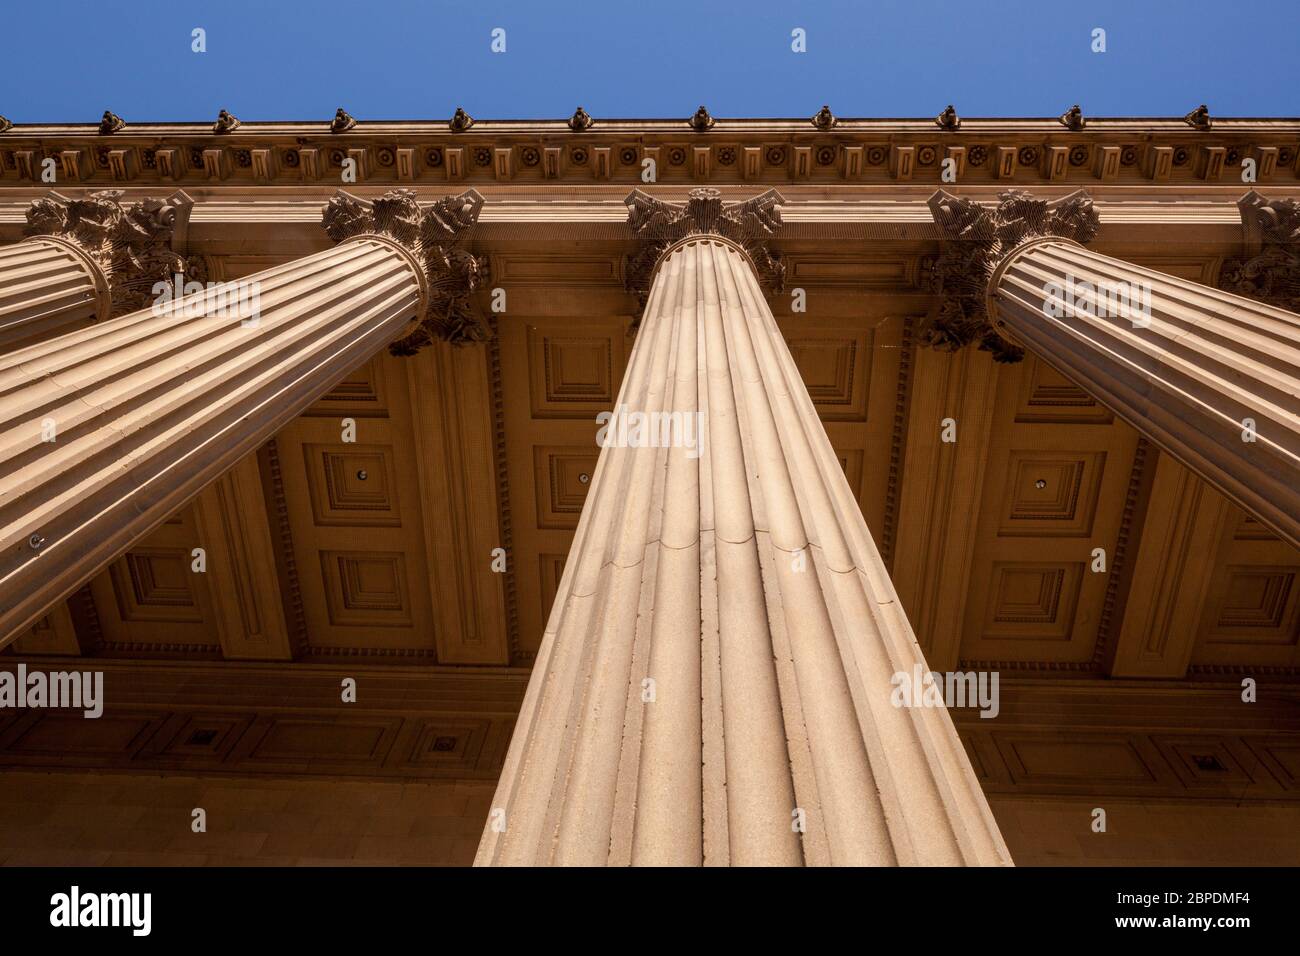 The Corinthian columns of the eastern facade of the Neoclassical Grade I listed St George's Hall in Liverpool, England Stock Photo